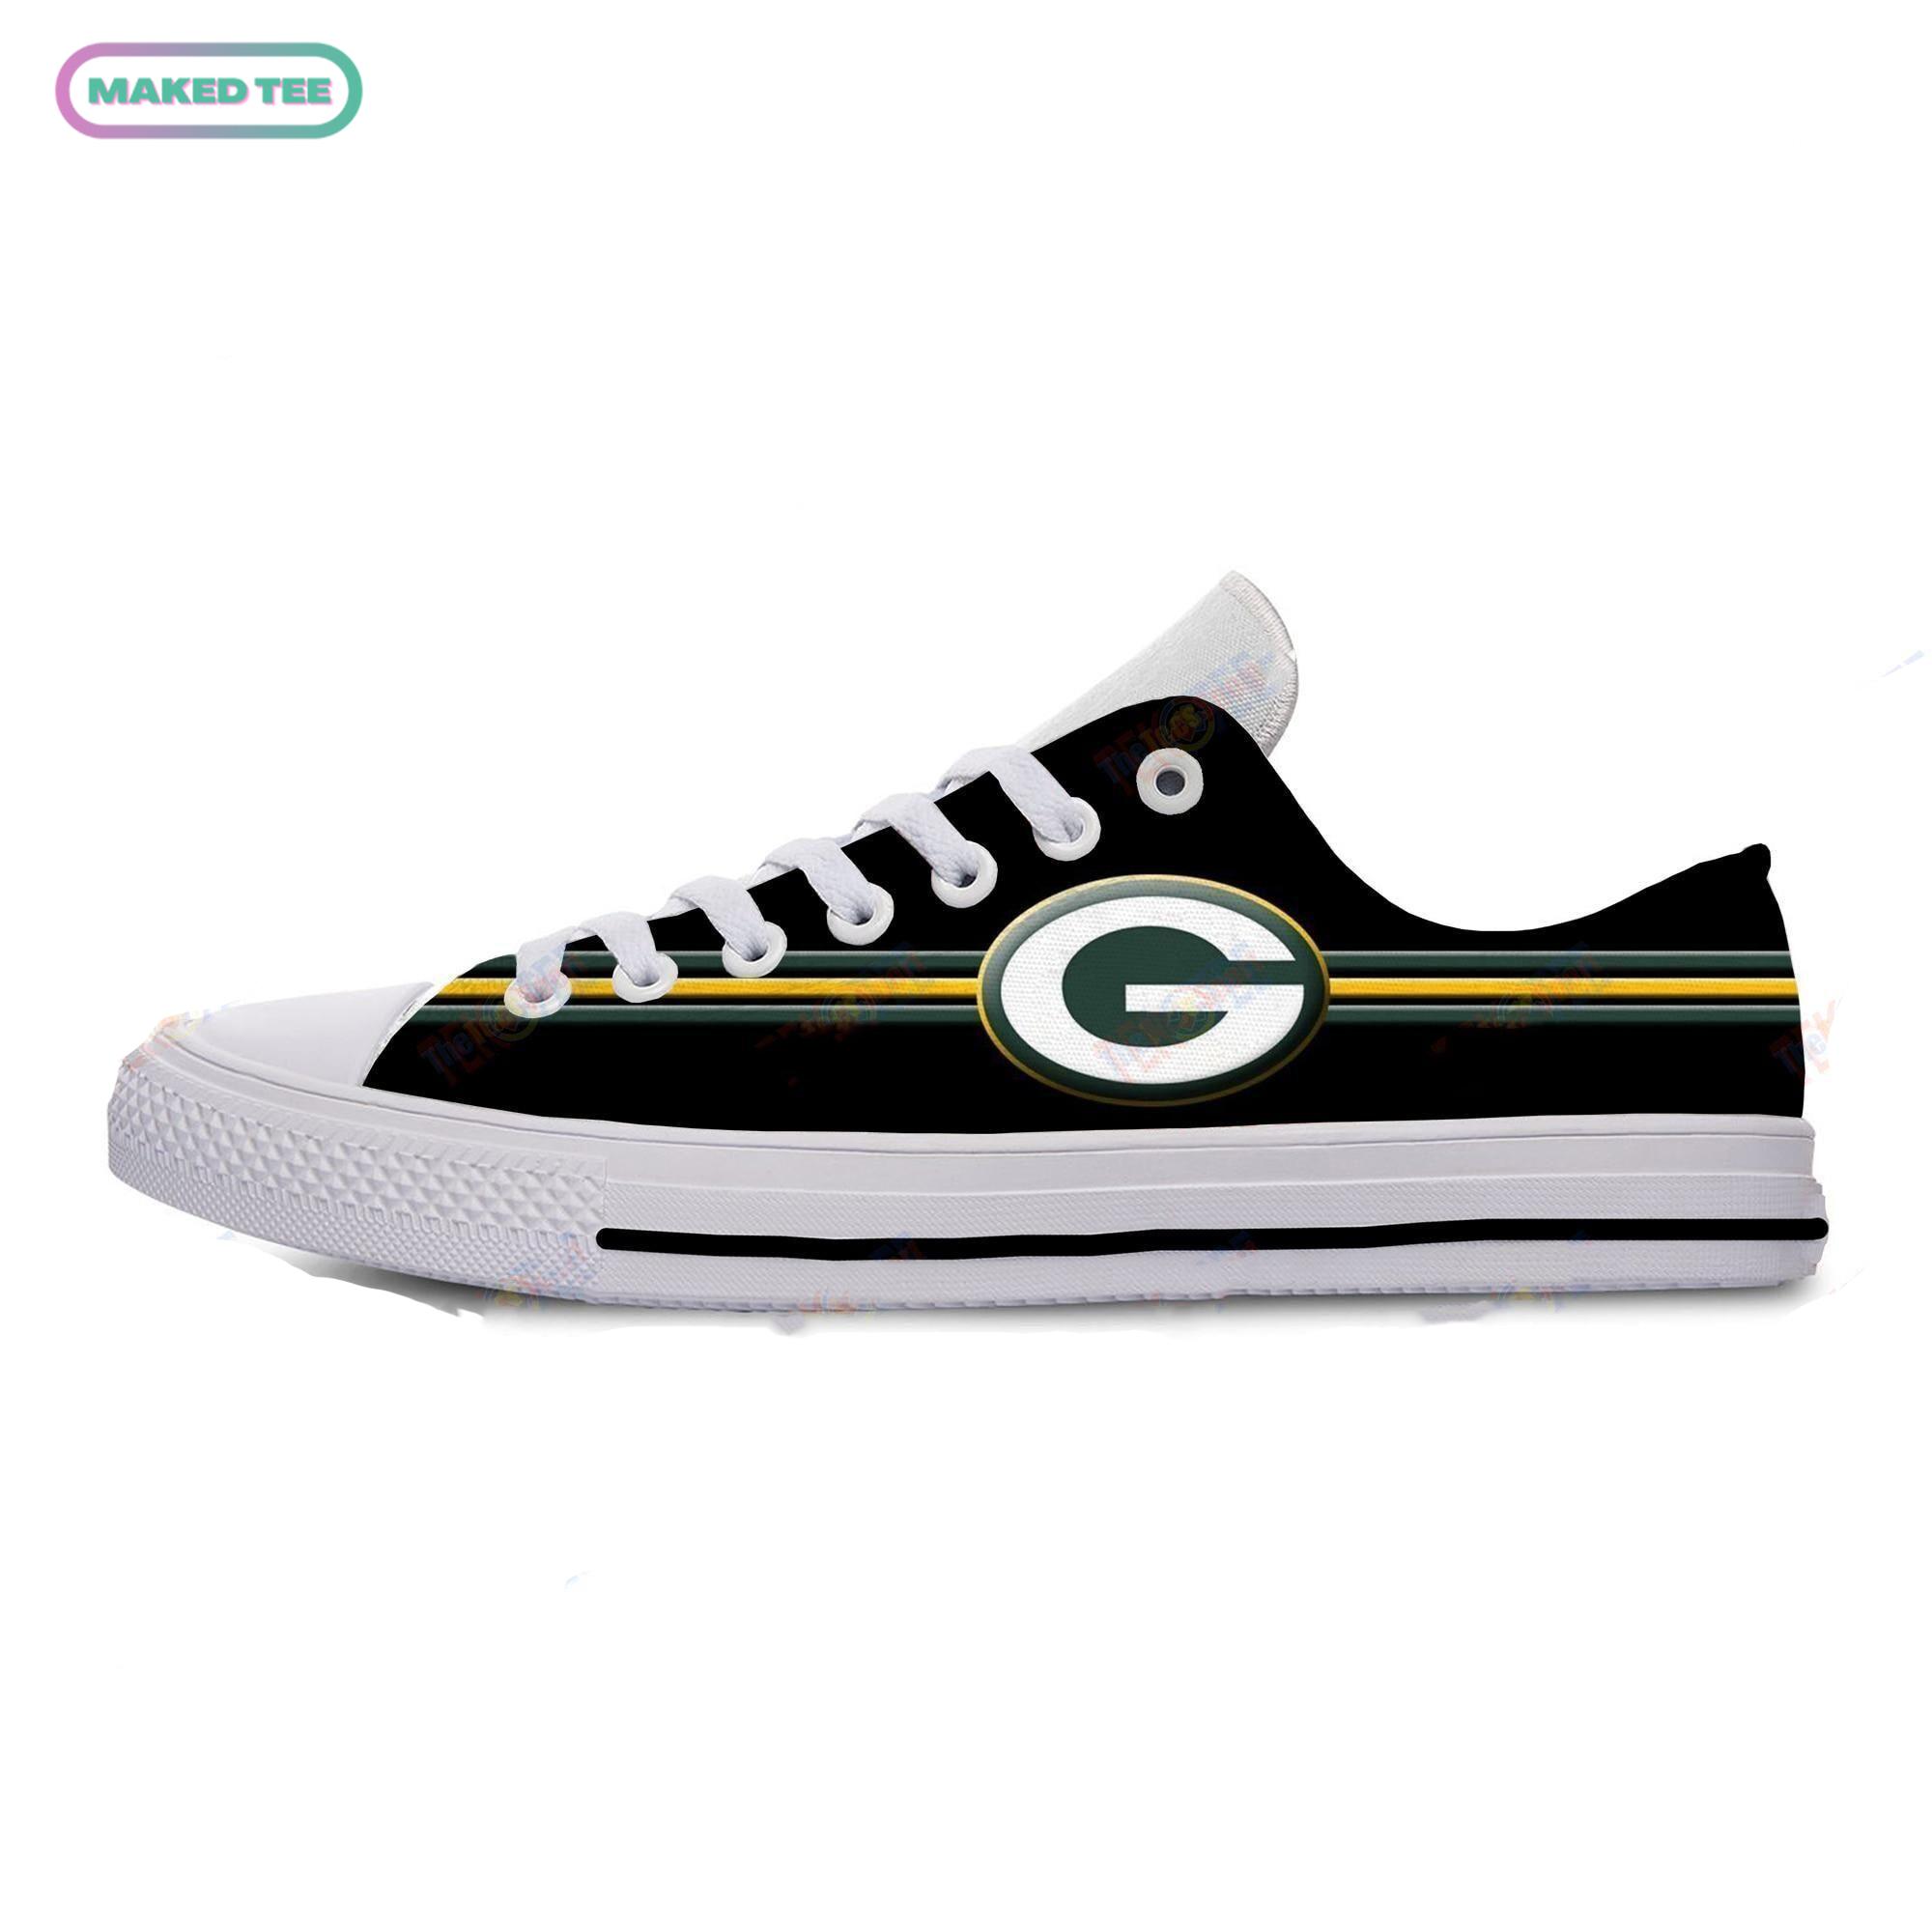 Nfl Green Bay Packers Low Top Canvas Shoes Sneakers Tmt571 Ds0 07470 z37